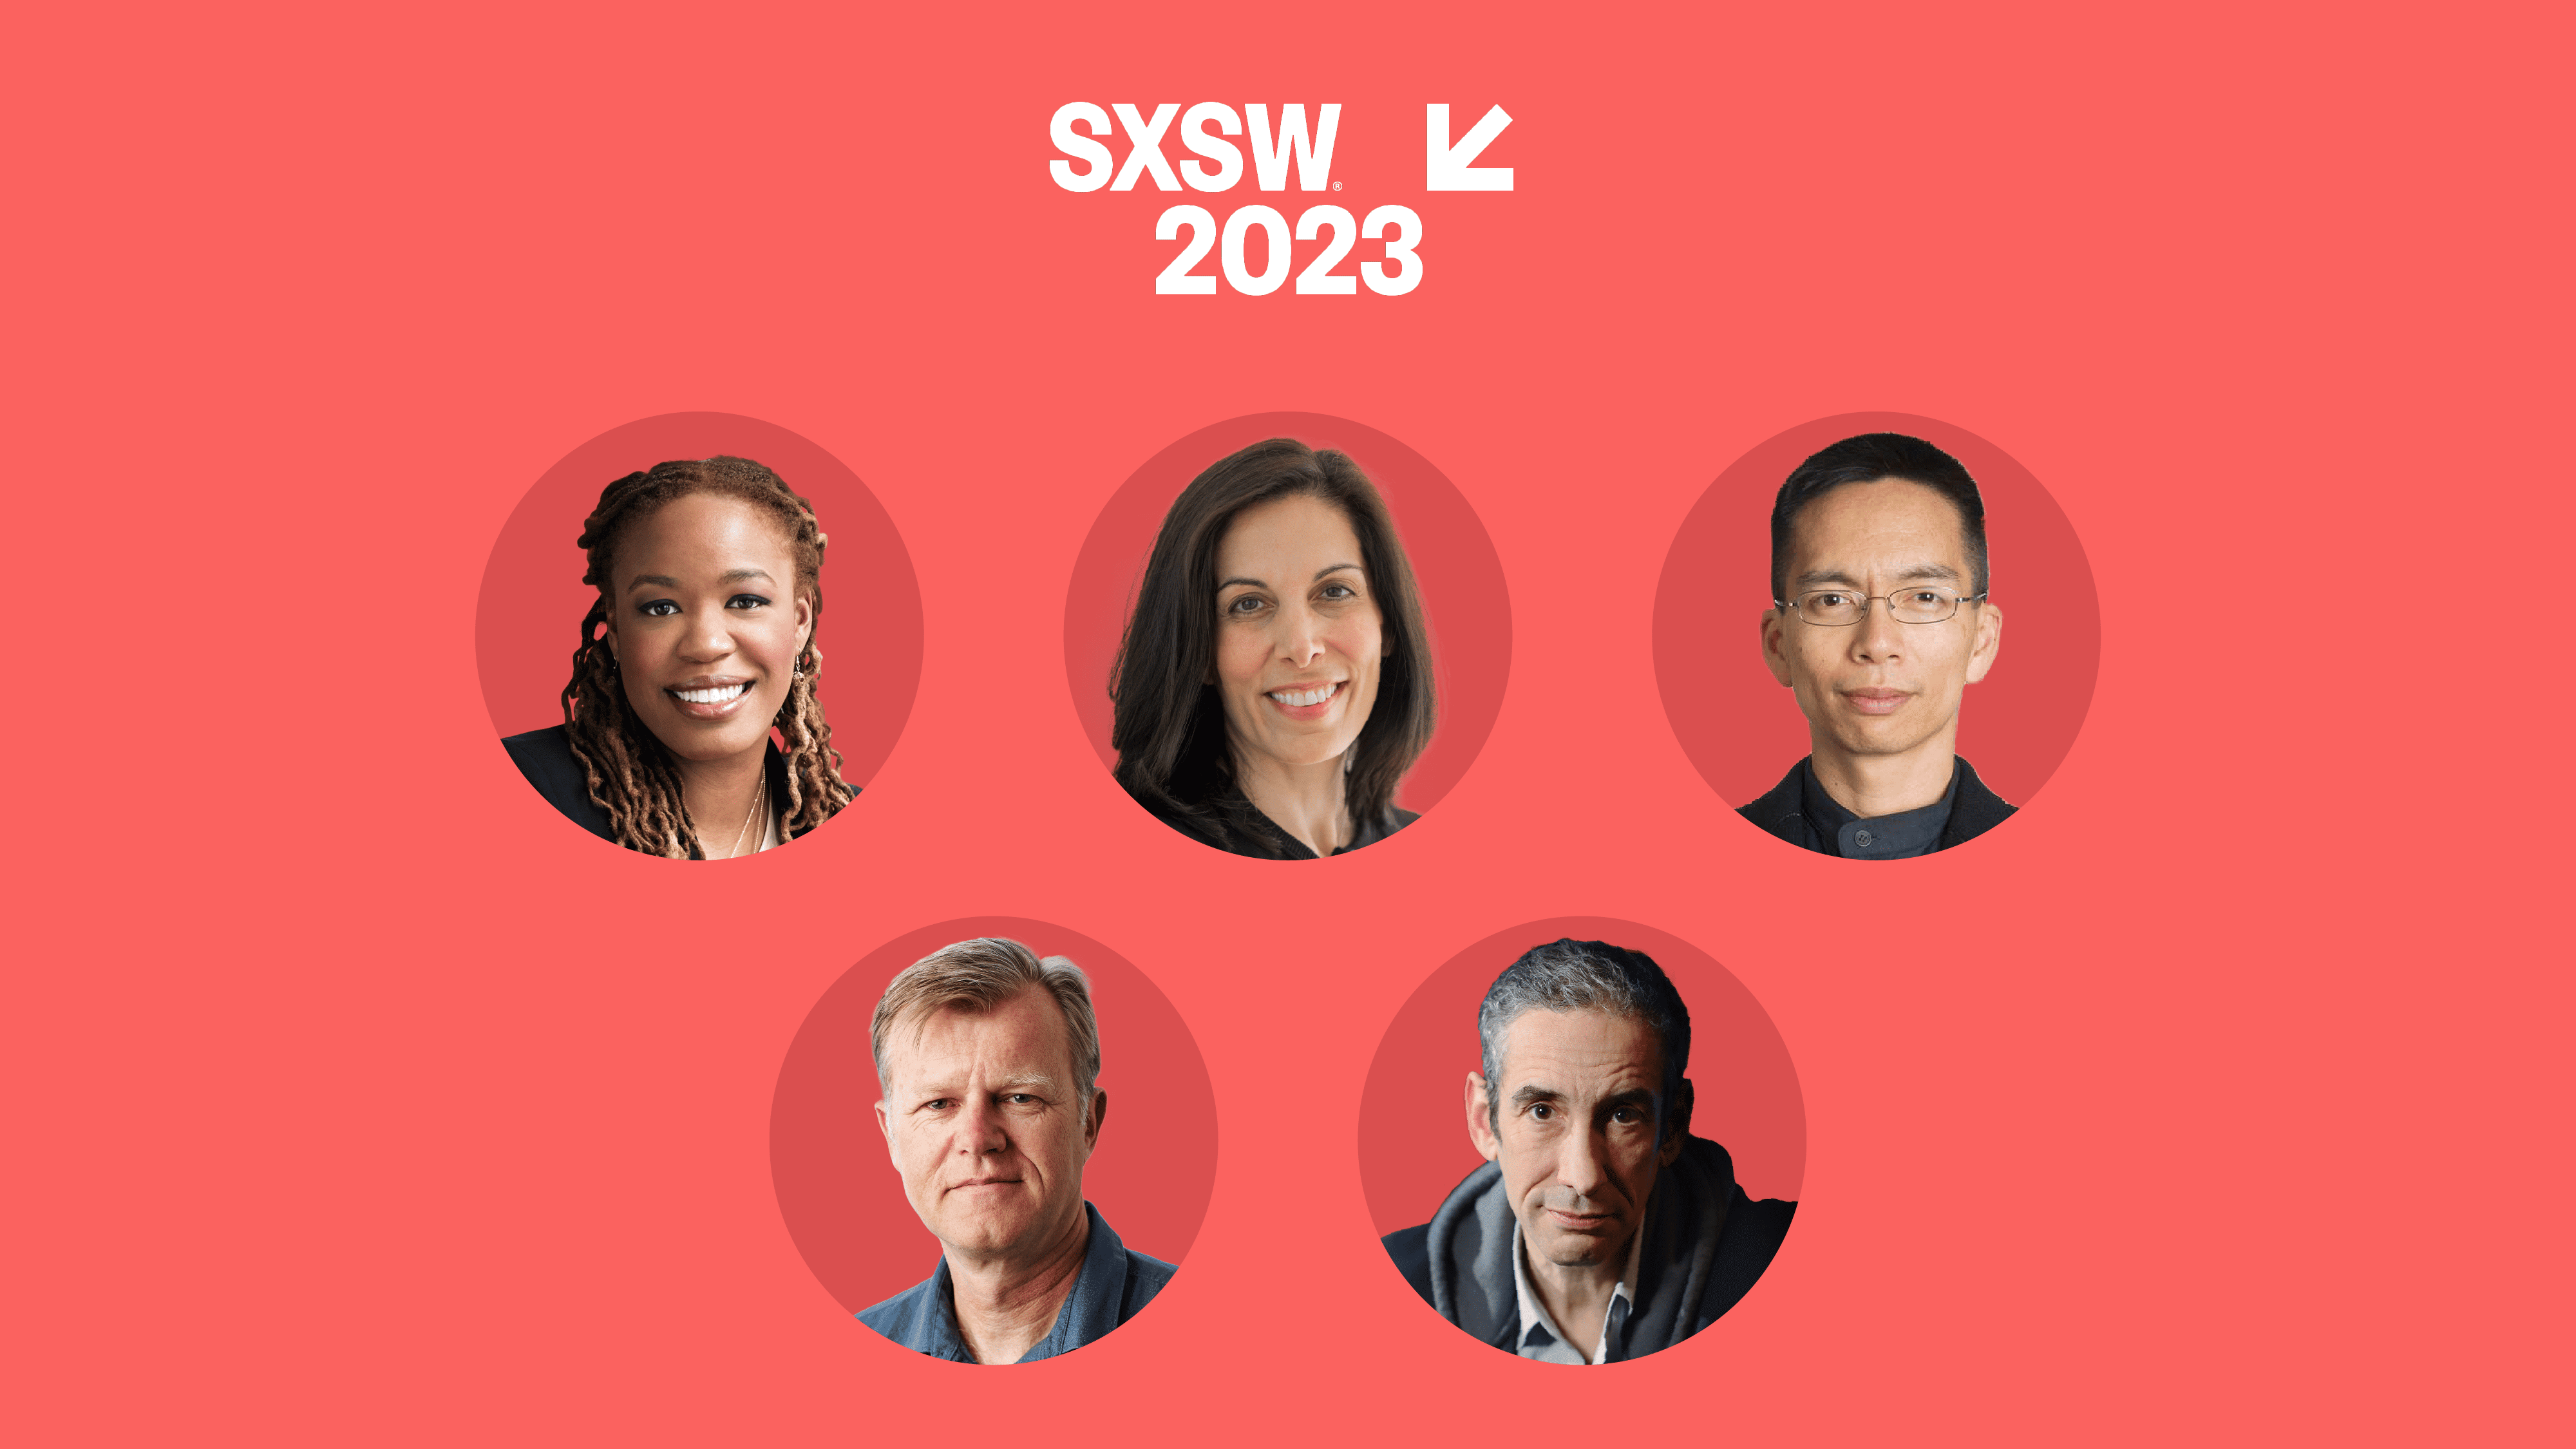 AI, Human Creativity, and Racial Justice: Five Highlights from Lavin Speakers at SXSW 2023